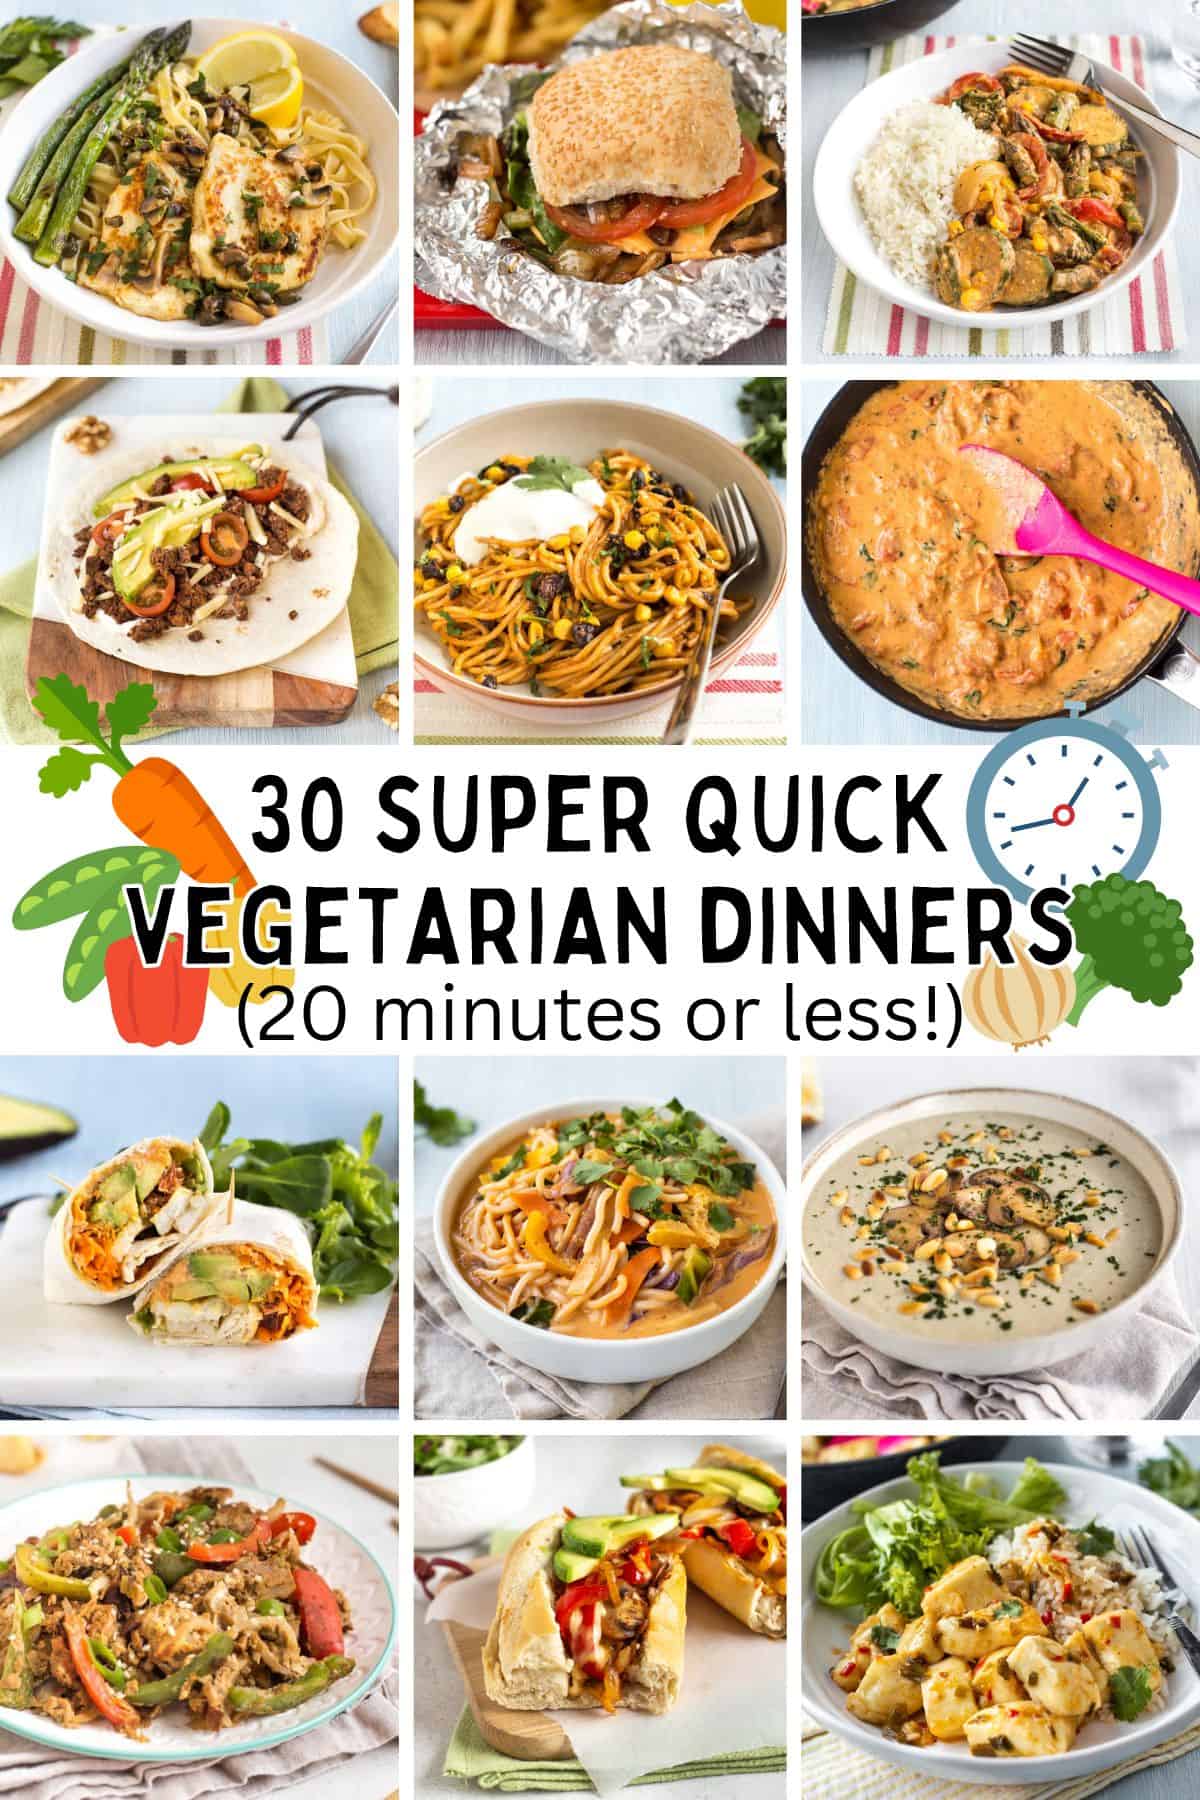 Quick Vegetarian Dinners Collage 1 